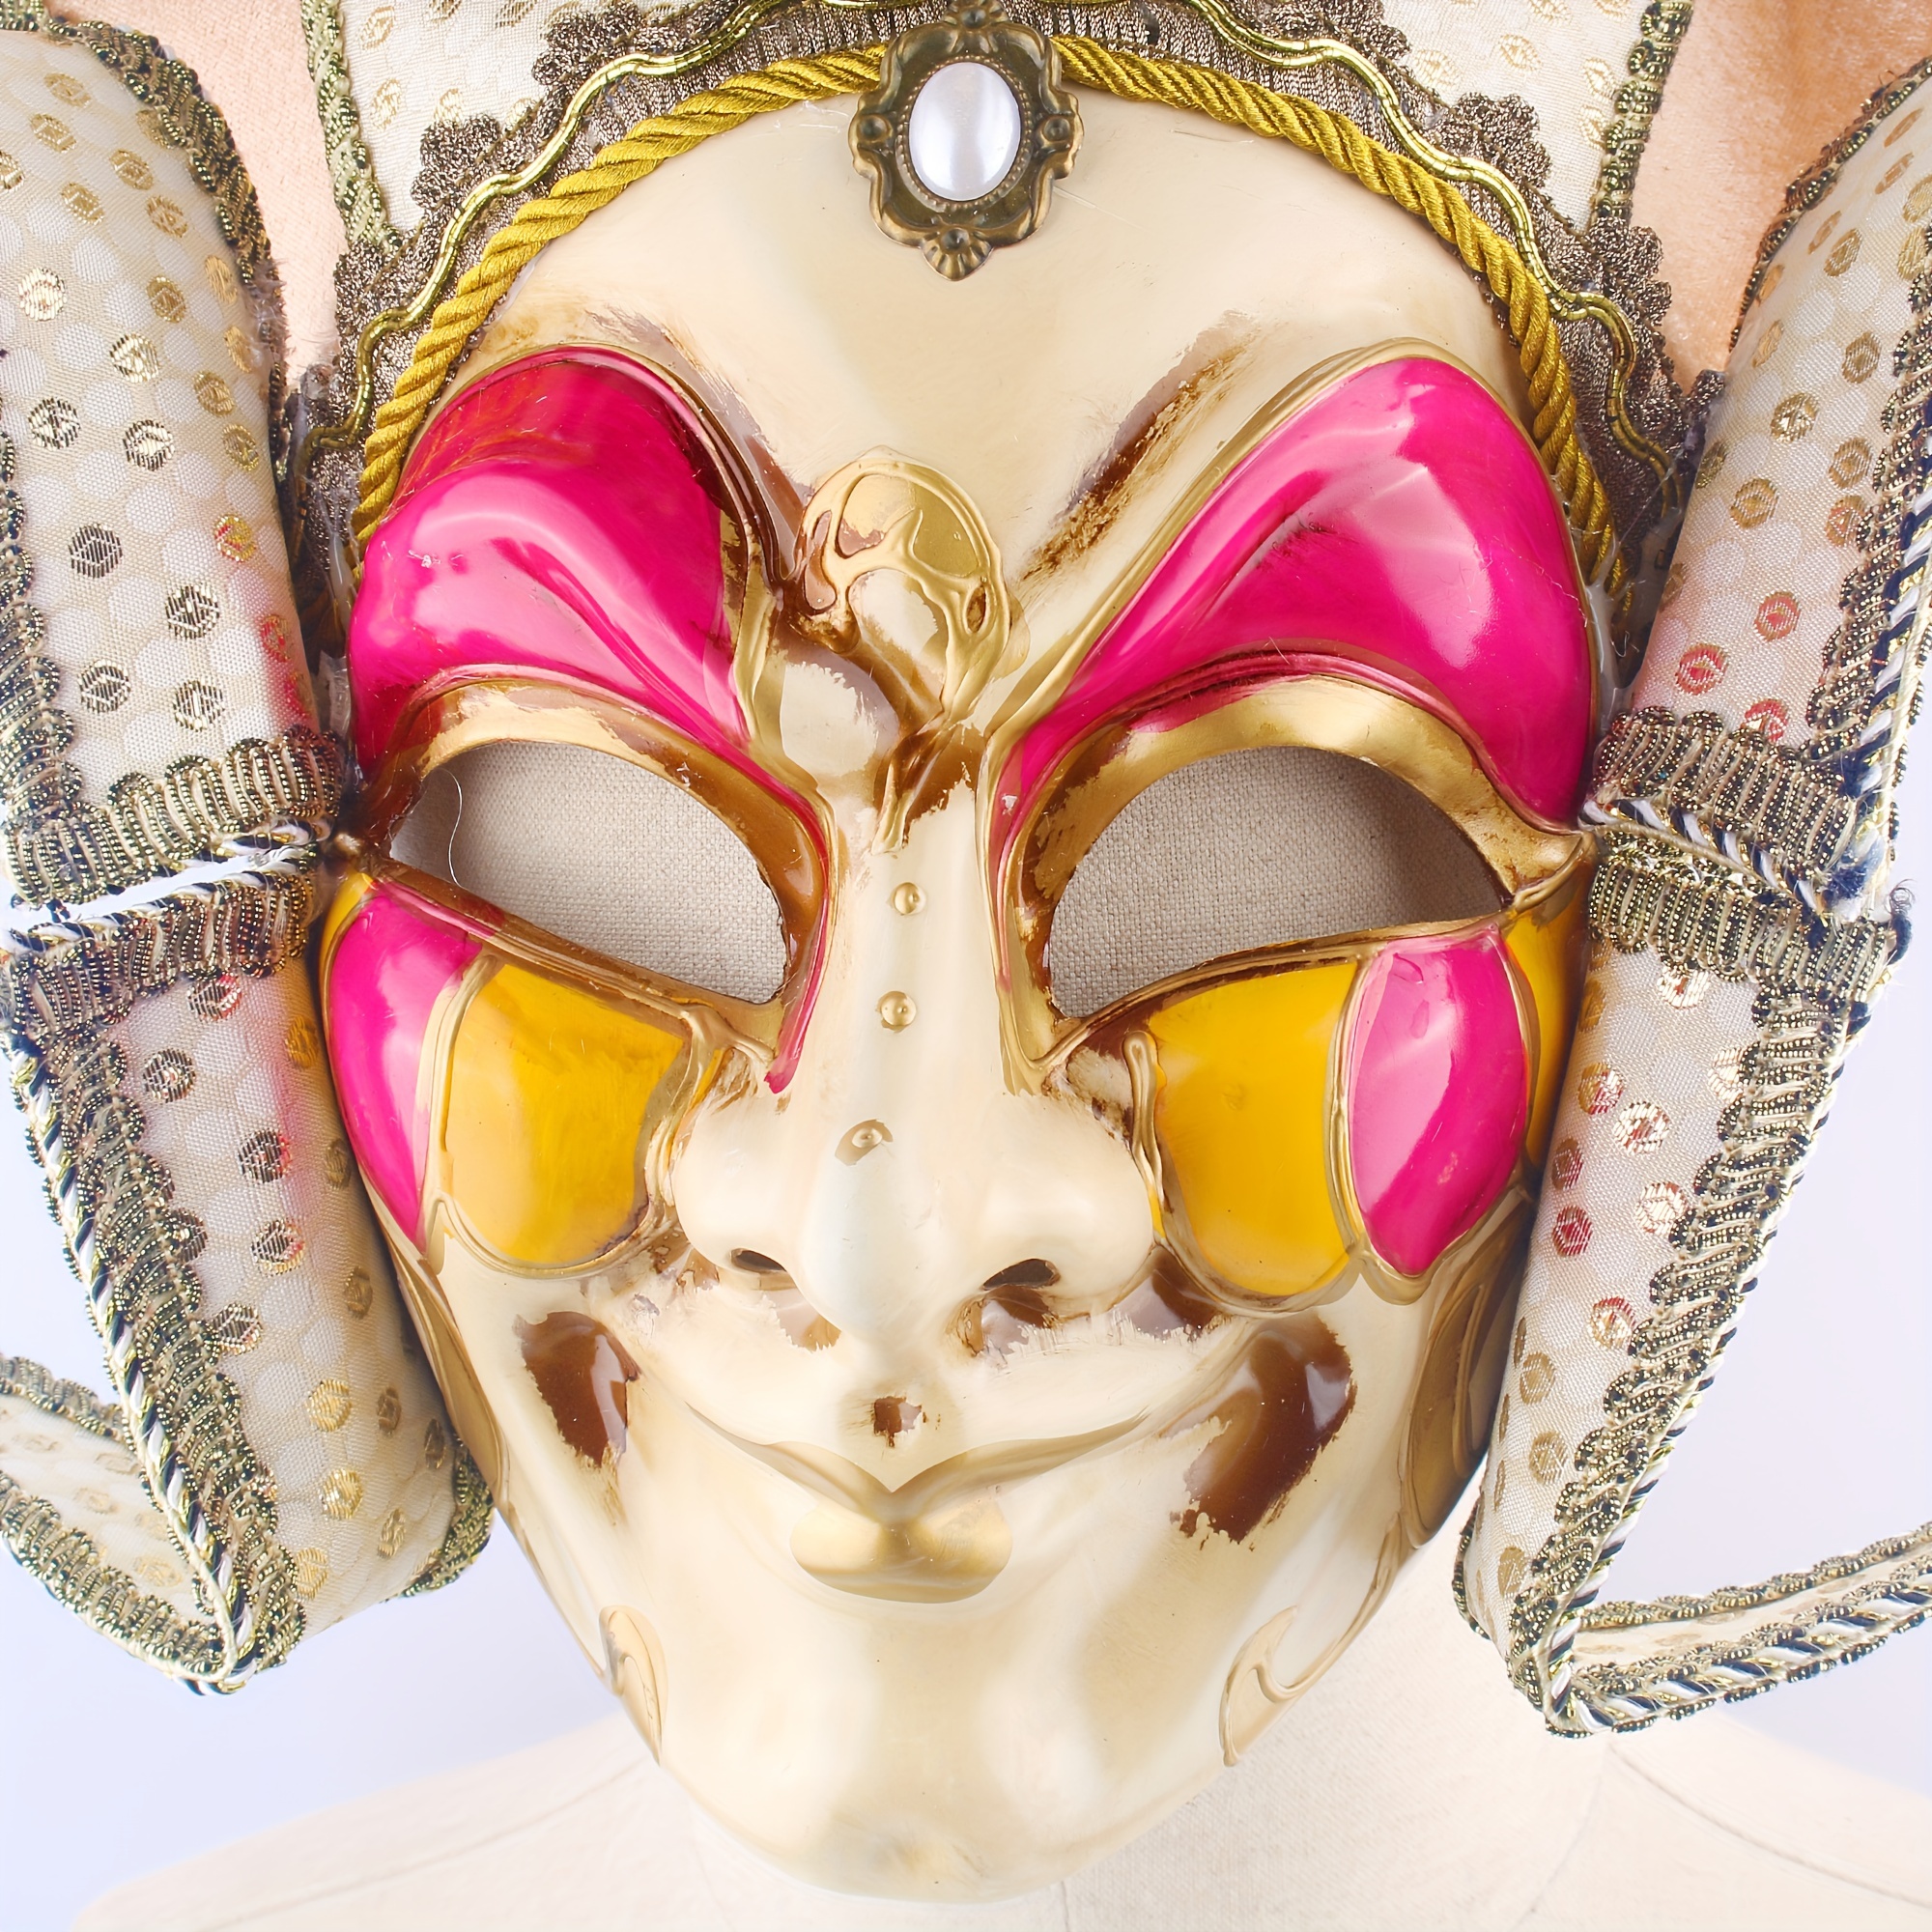 Decorative Comedy Mask by